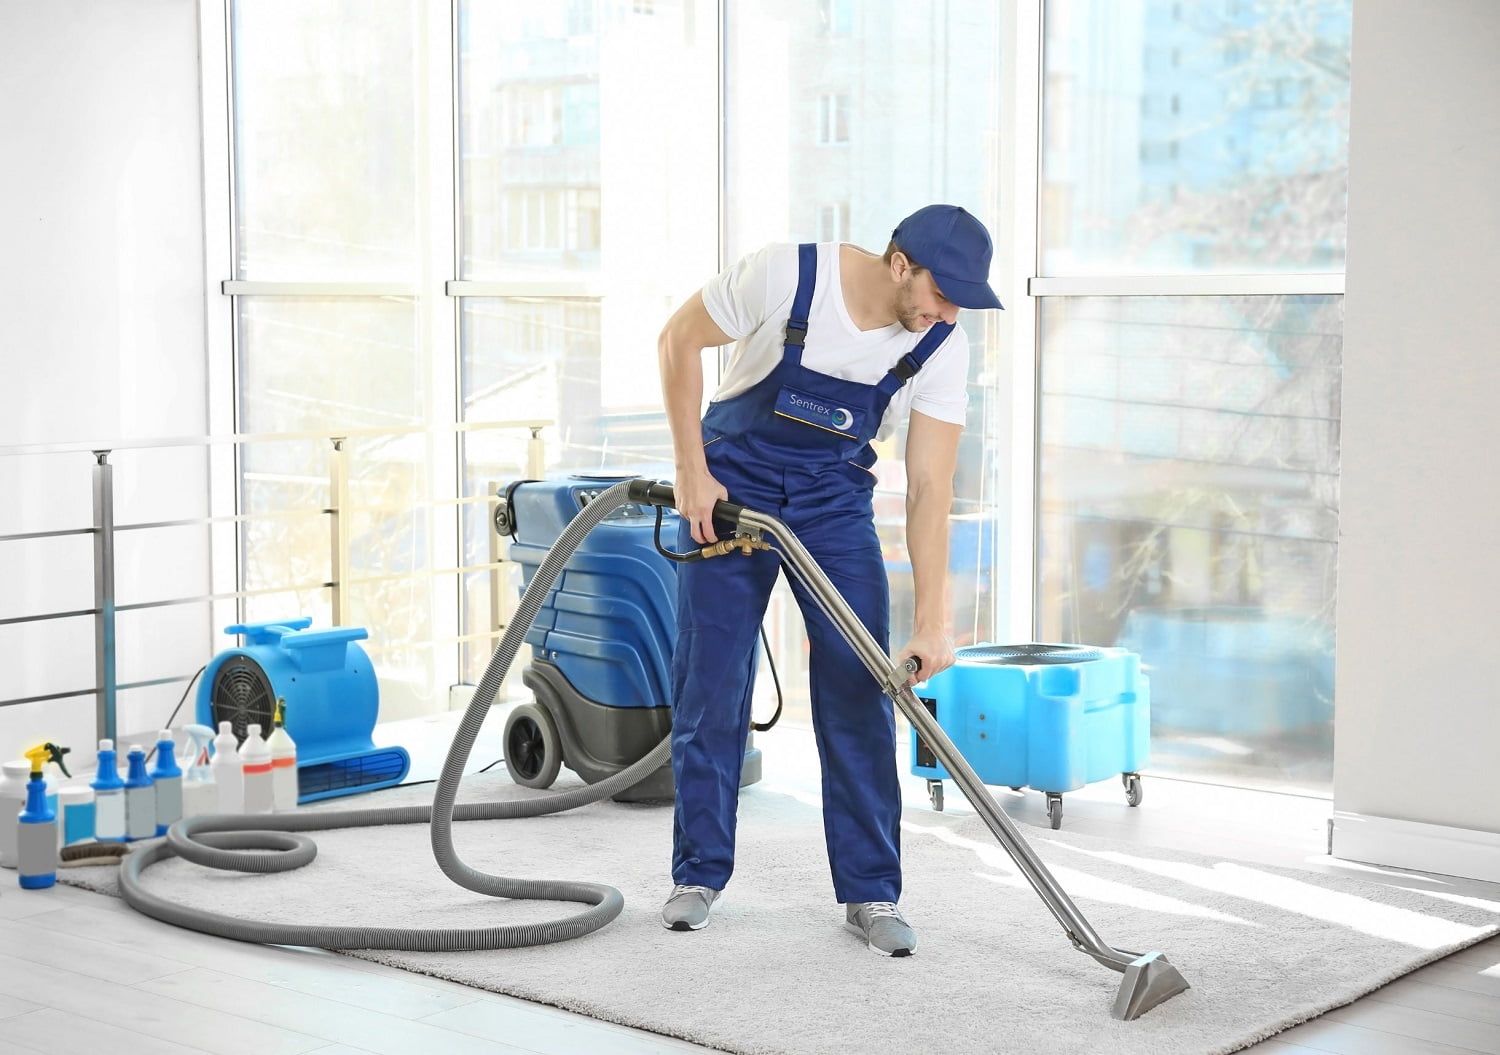 clarks cleaners is a housekeeping service